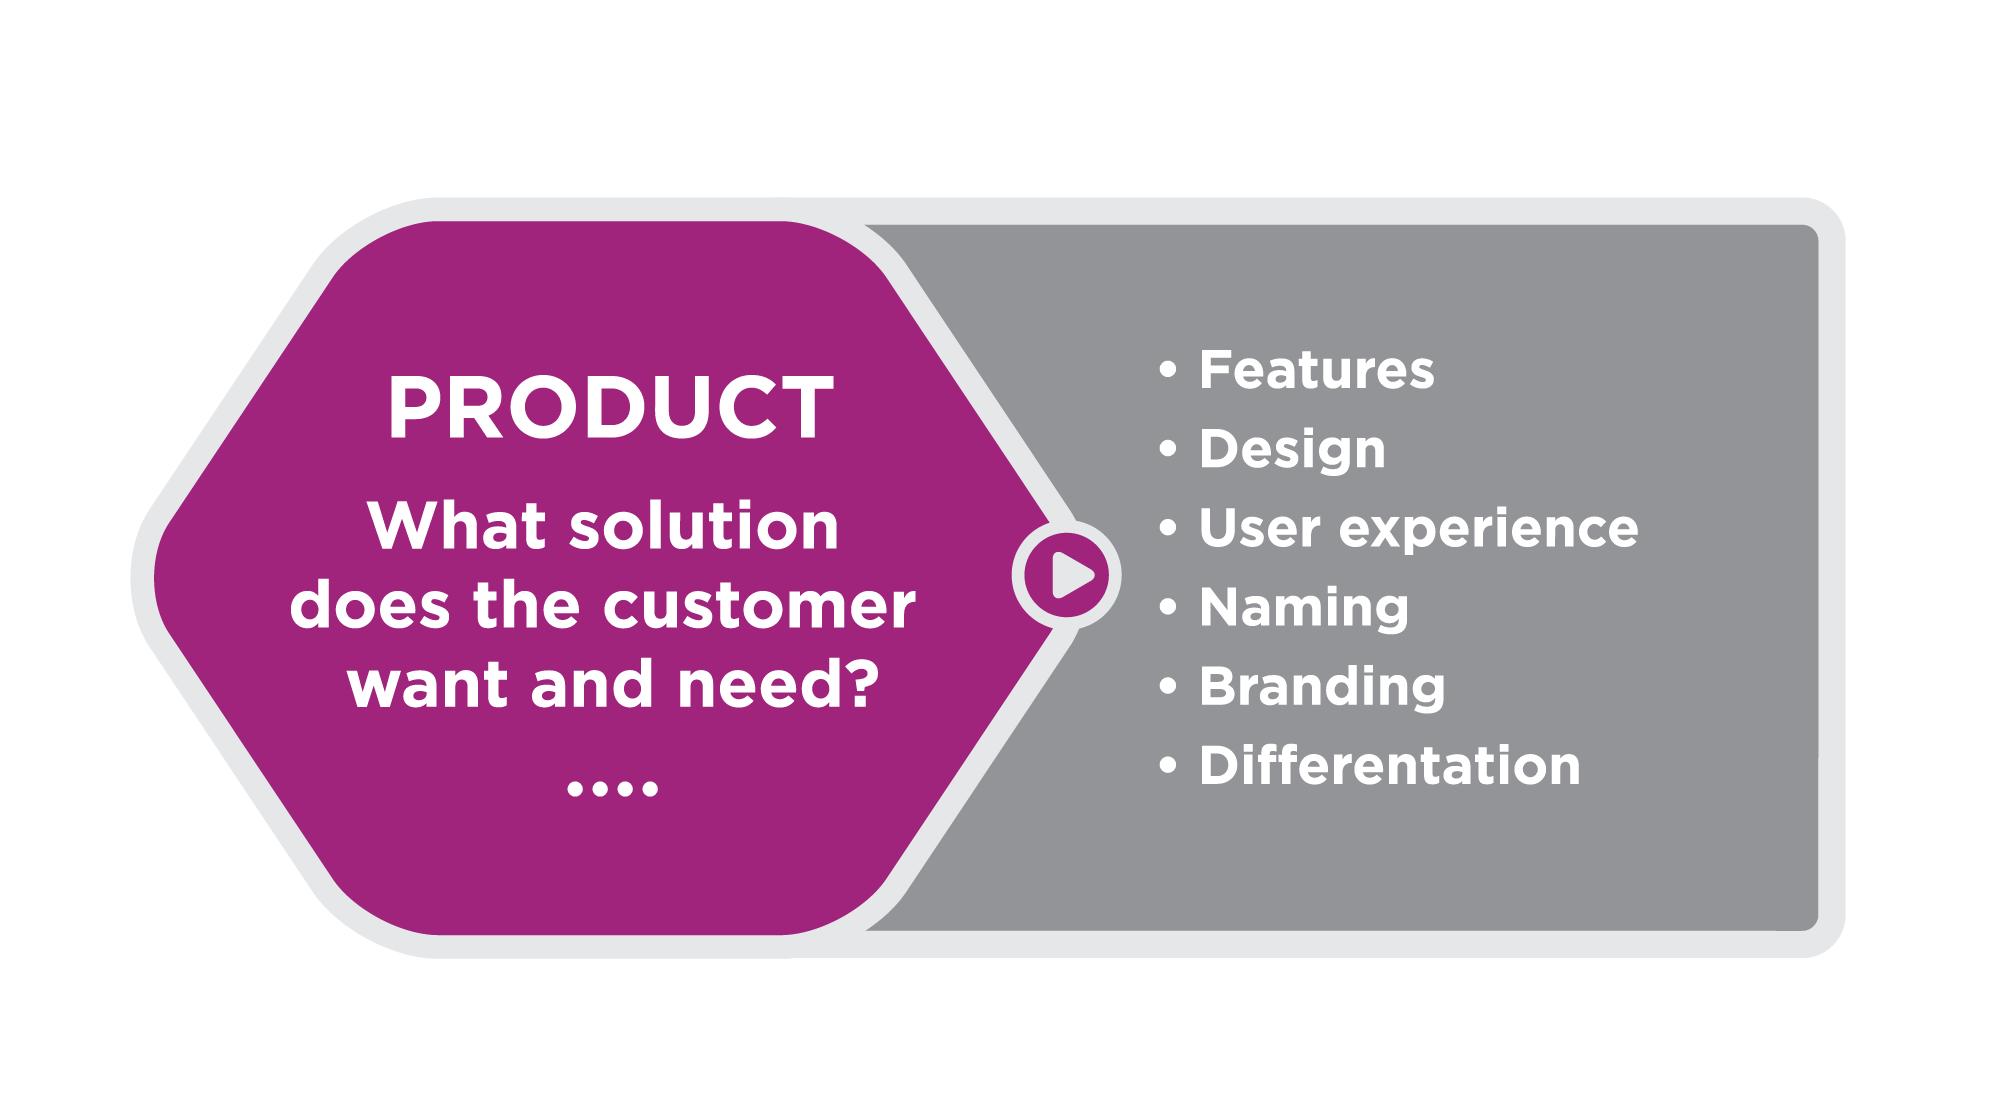 Purple hexagon with the following text in the center: Product: What solution does the customer want and need. Outside the hexagon, to the right, is a list of considerations: features, design, user experience, naming, branding, differentiation